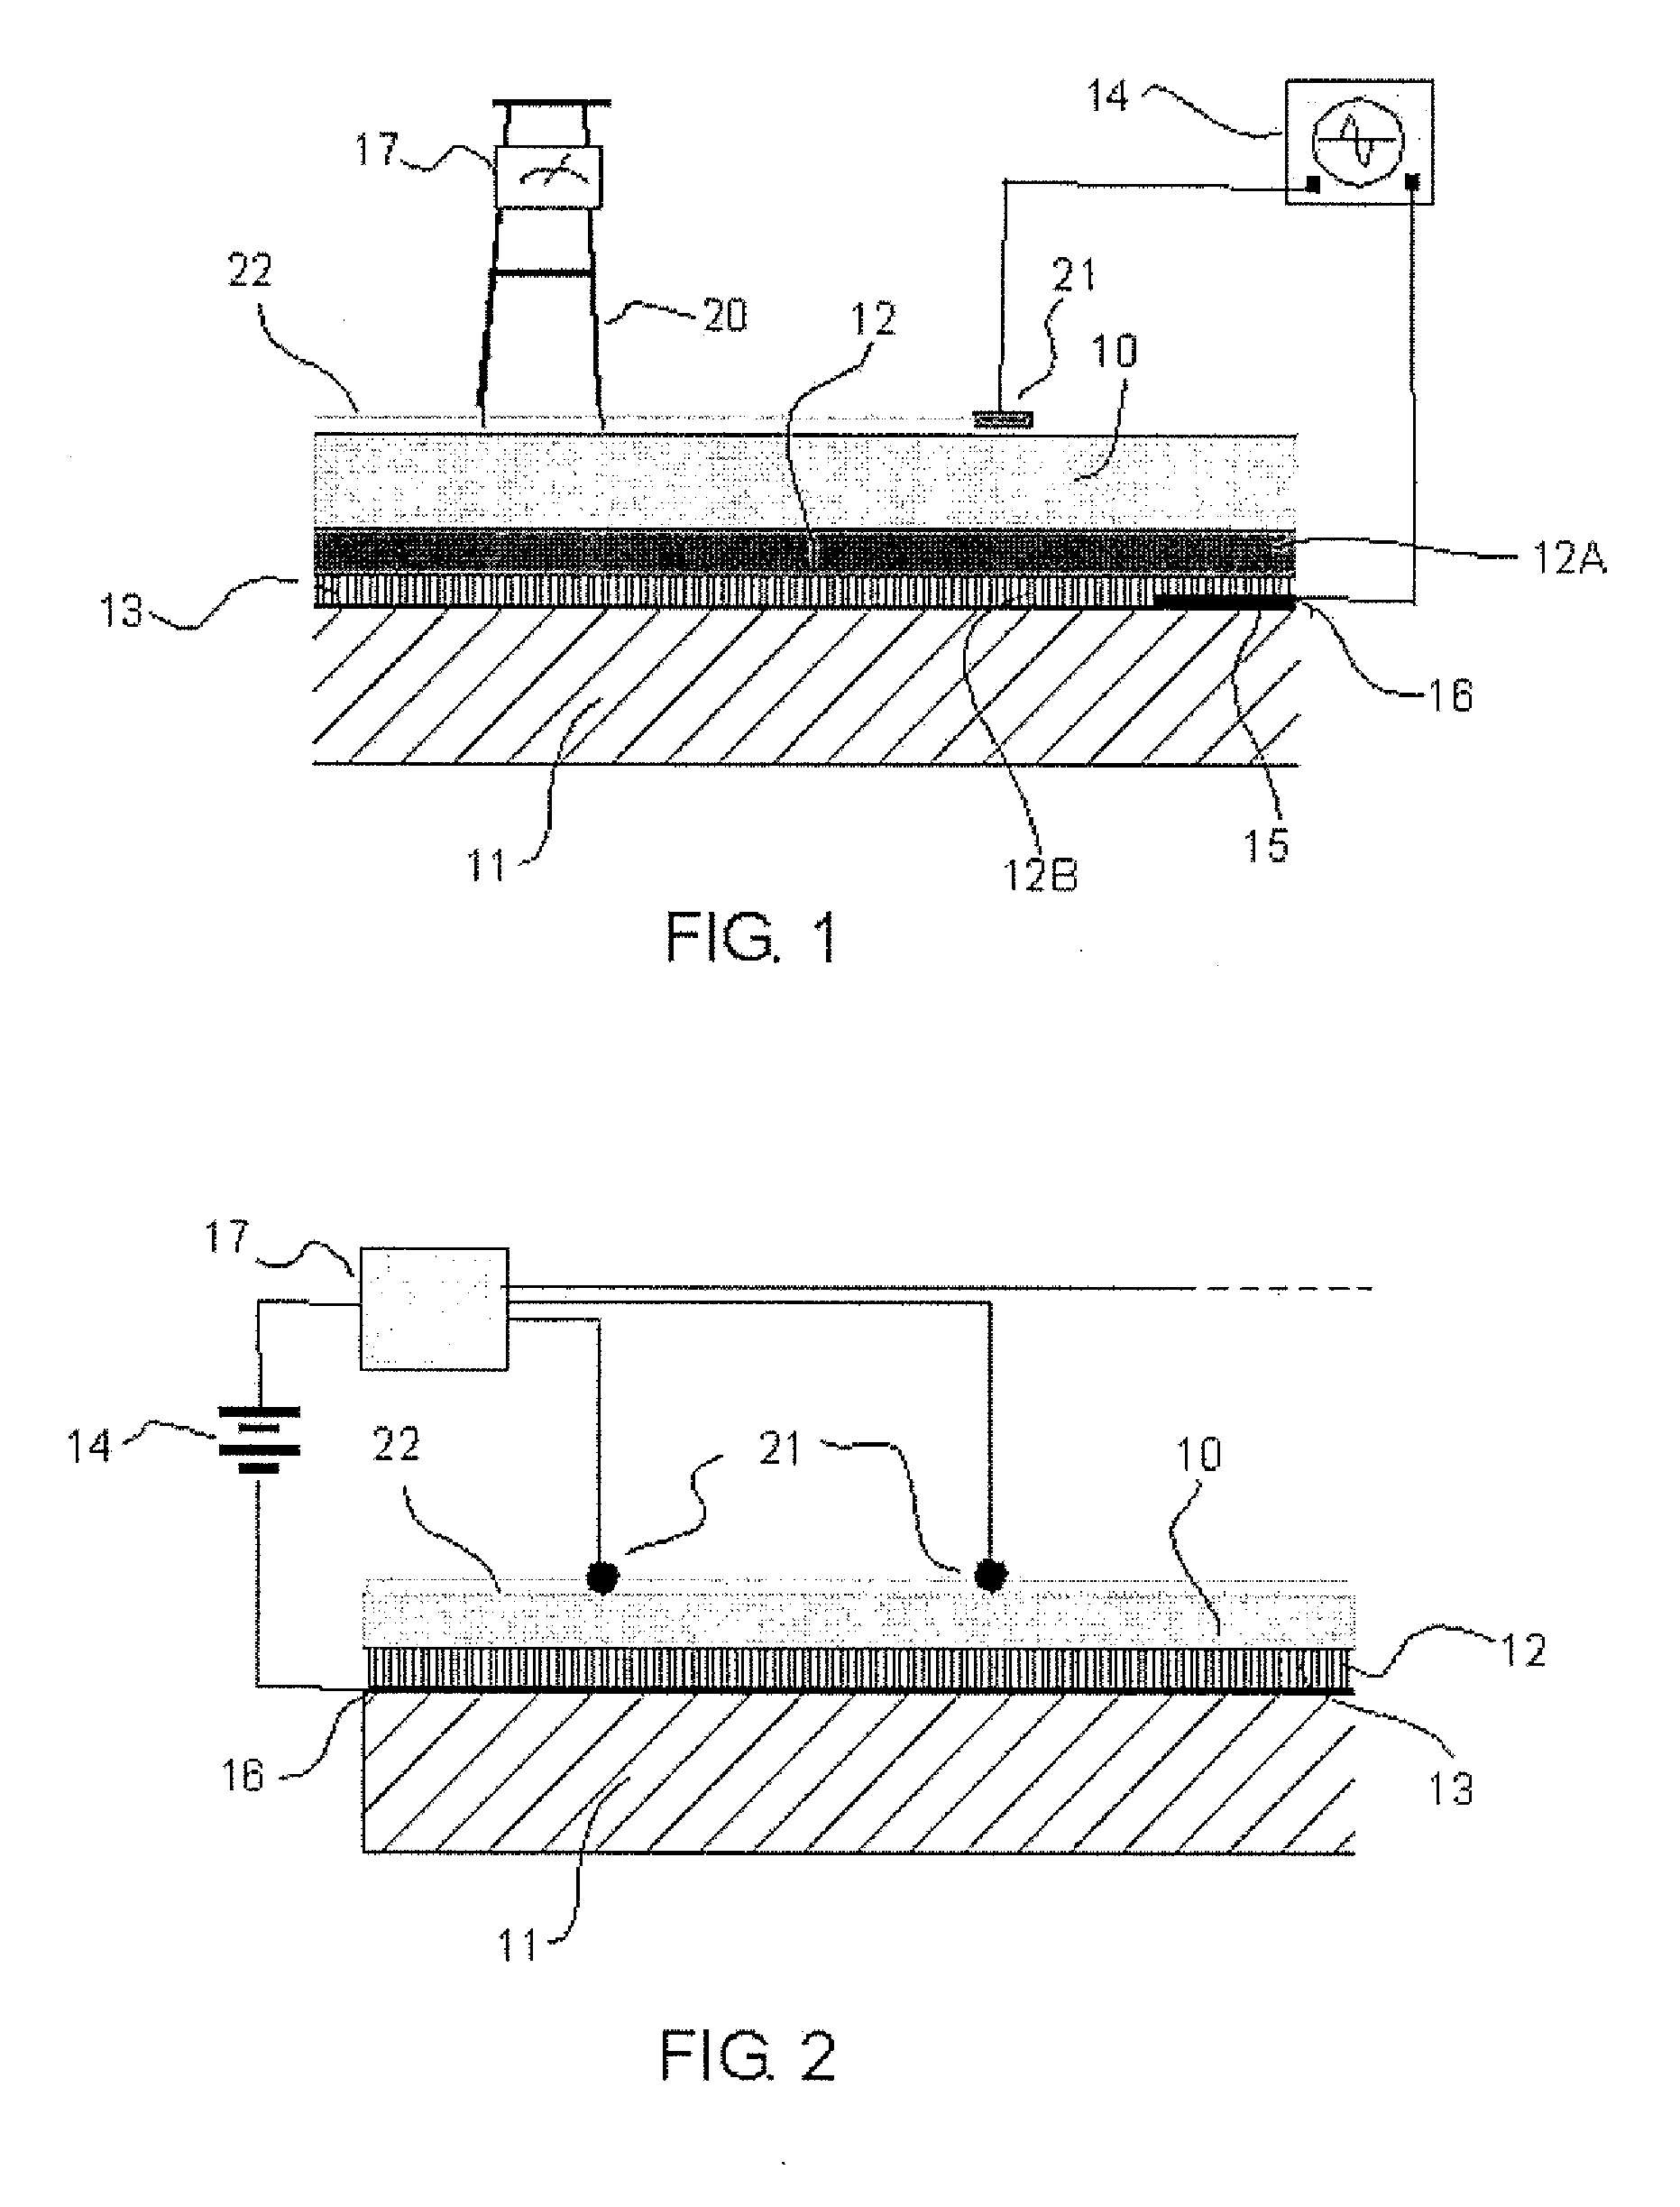 Method of Detecting a Leak in a Membrane of a Roof